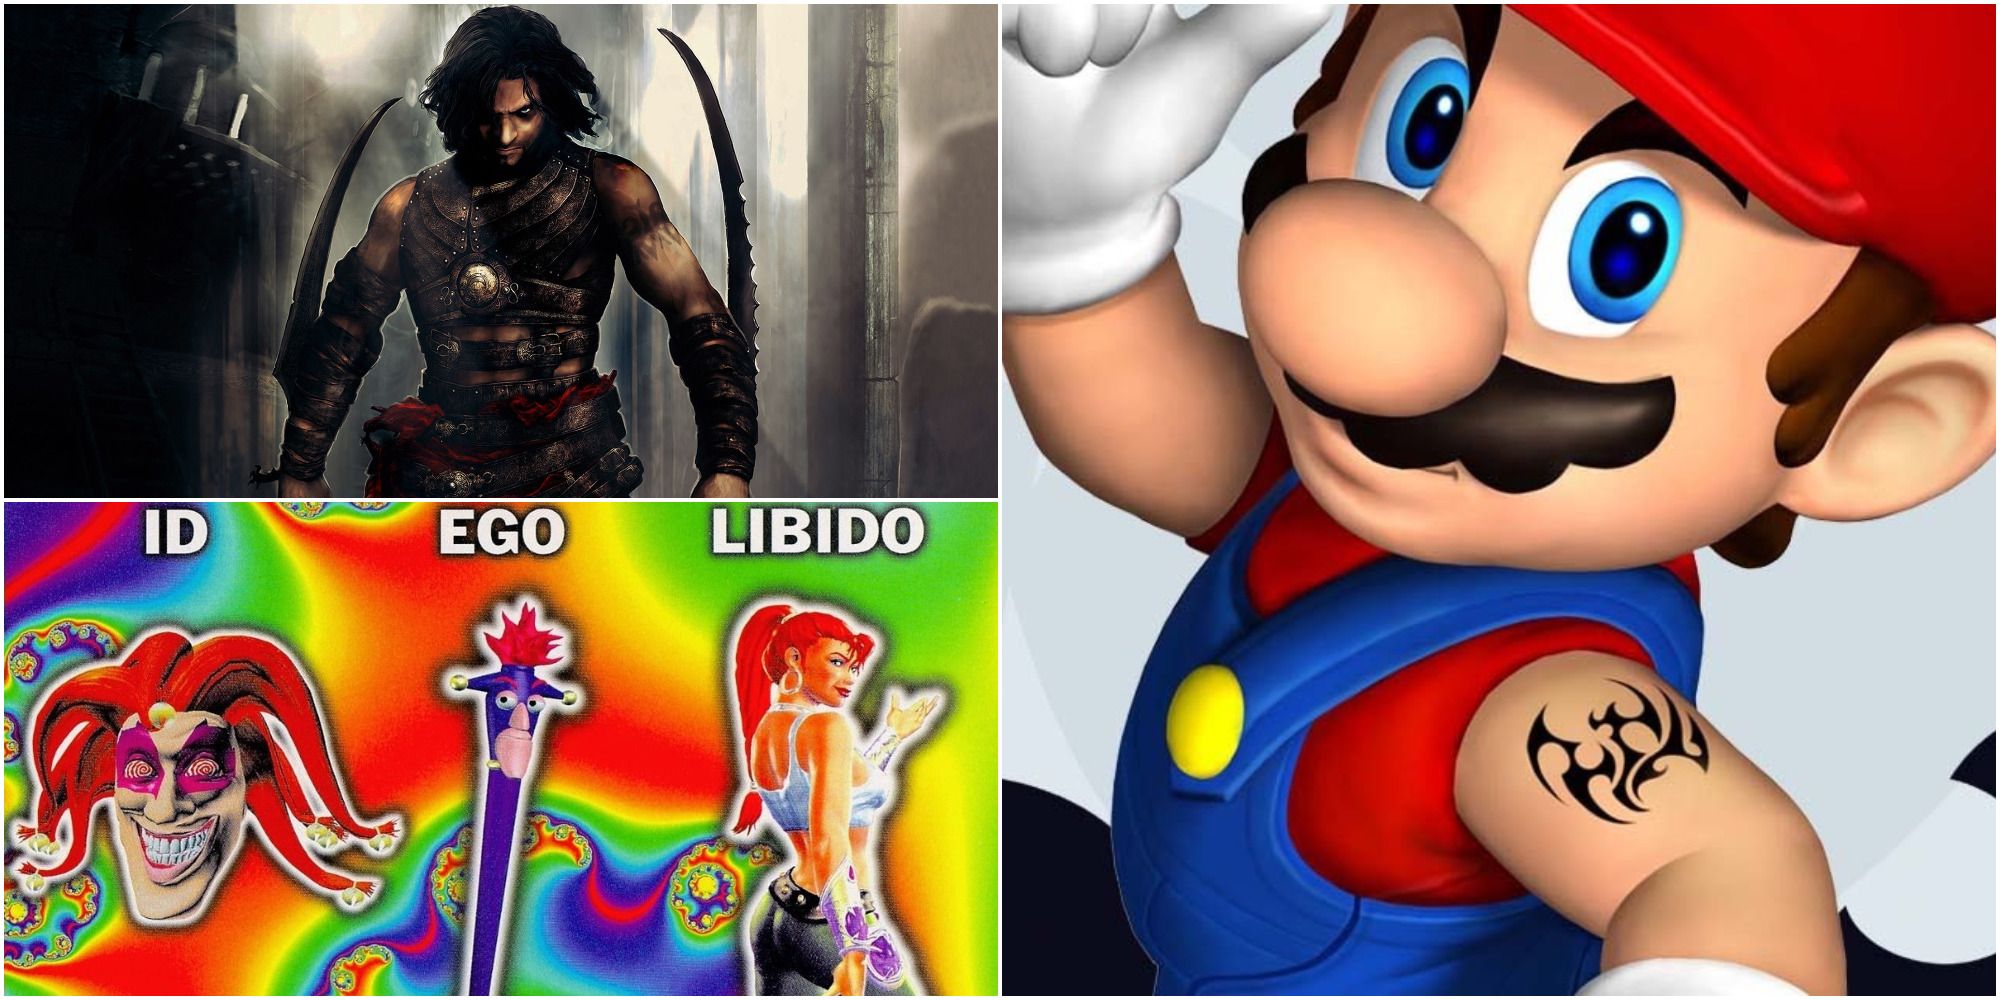 Video Game Mascots Who Went Edgy Mario Prince of Persia Pandemonium